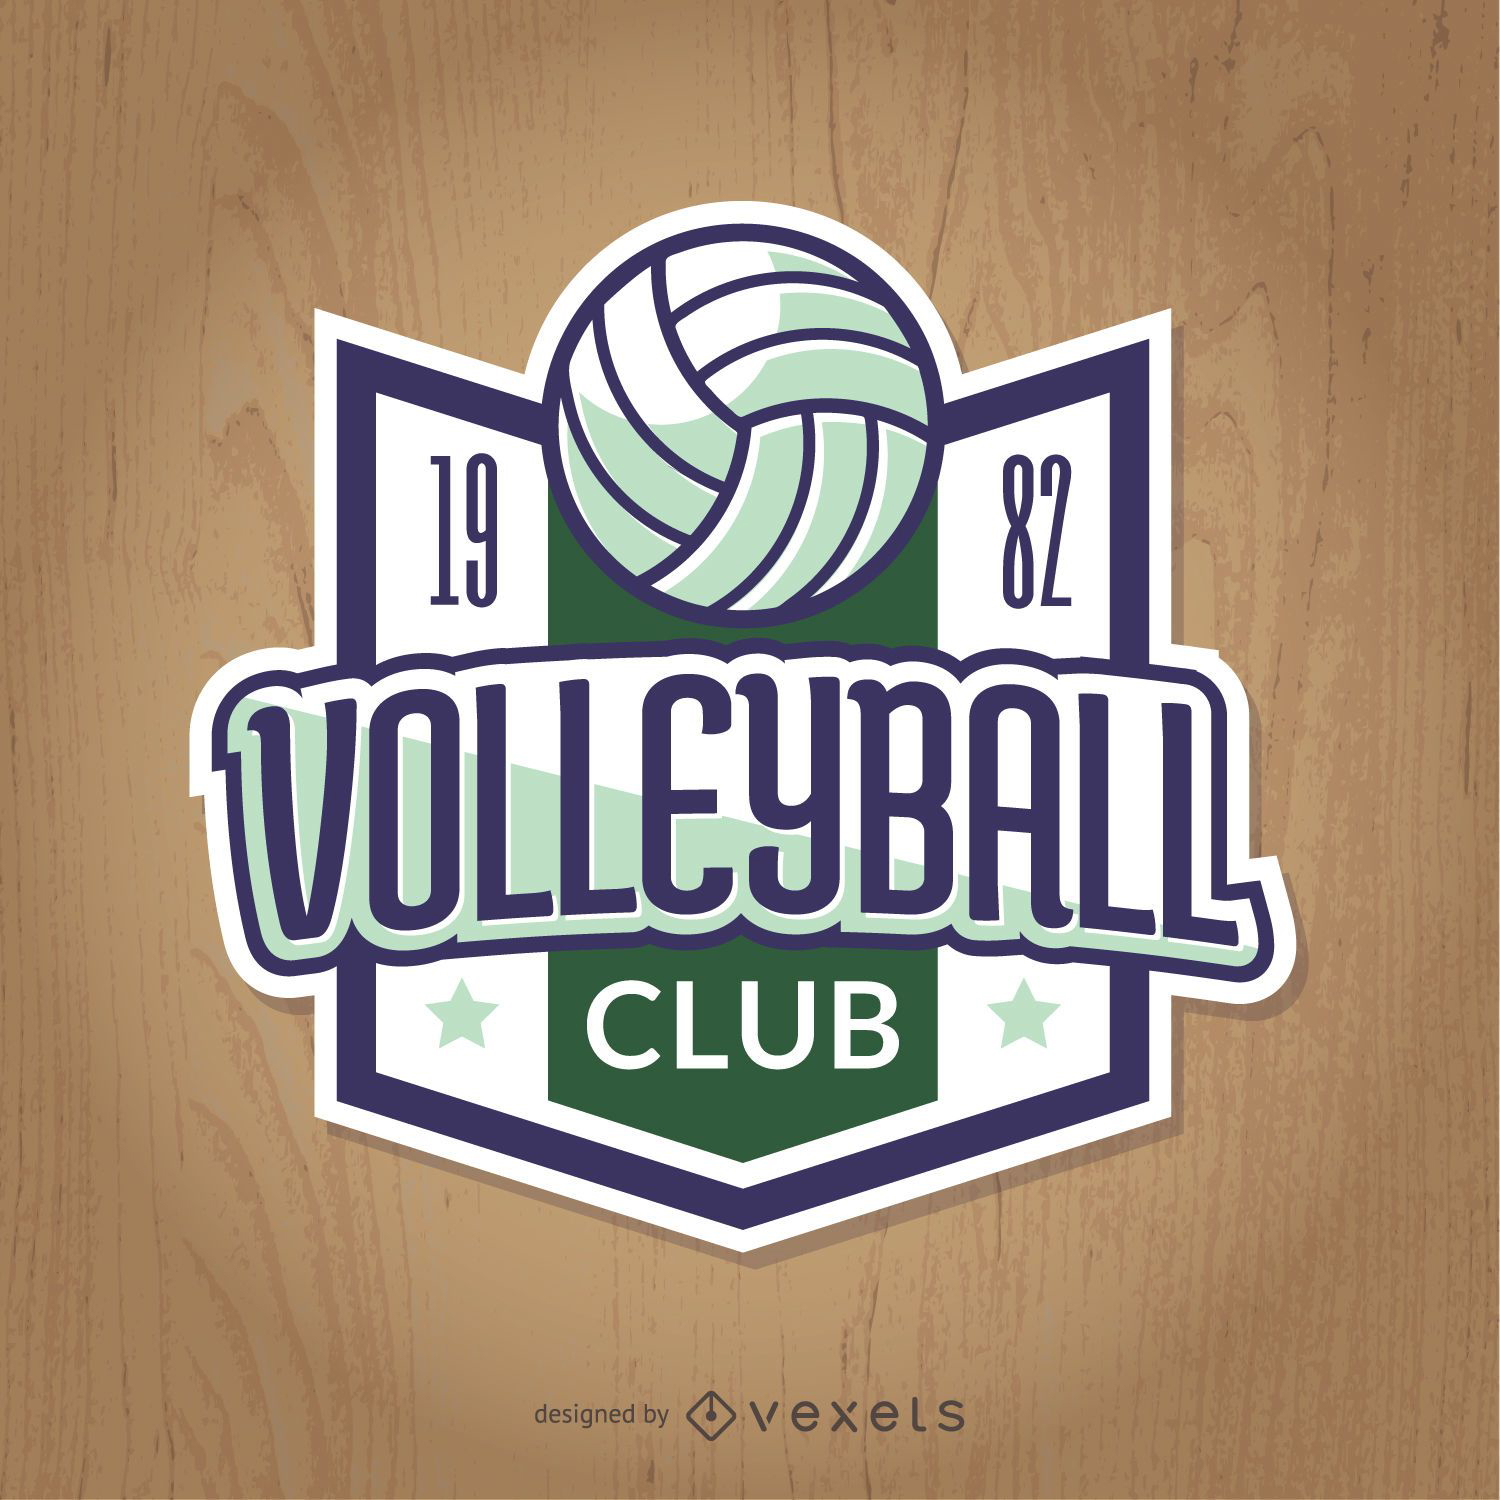 Vintage volleyball badge in green and blue